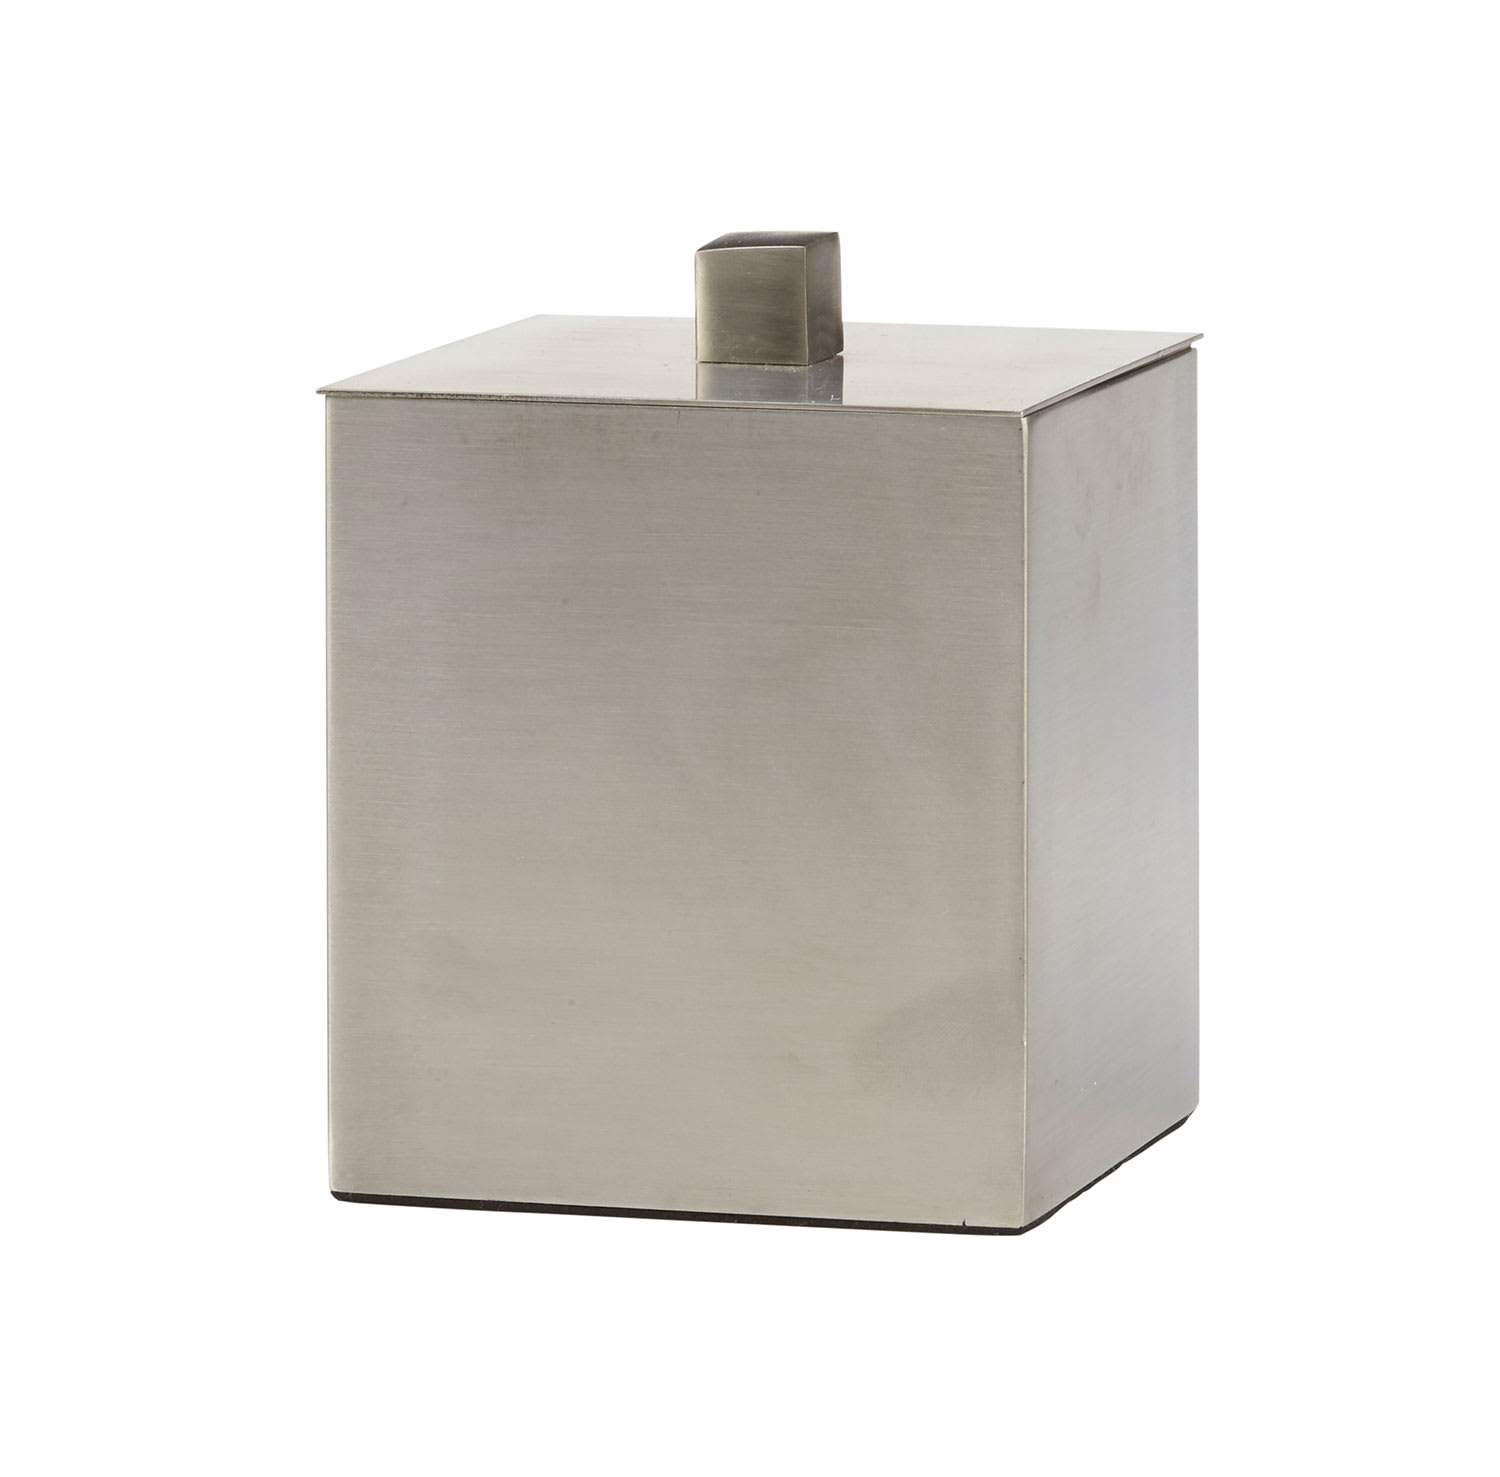 Stainless Steel Cubed Bath Canister